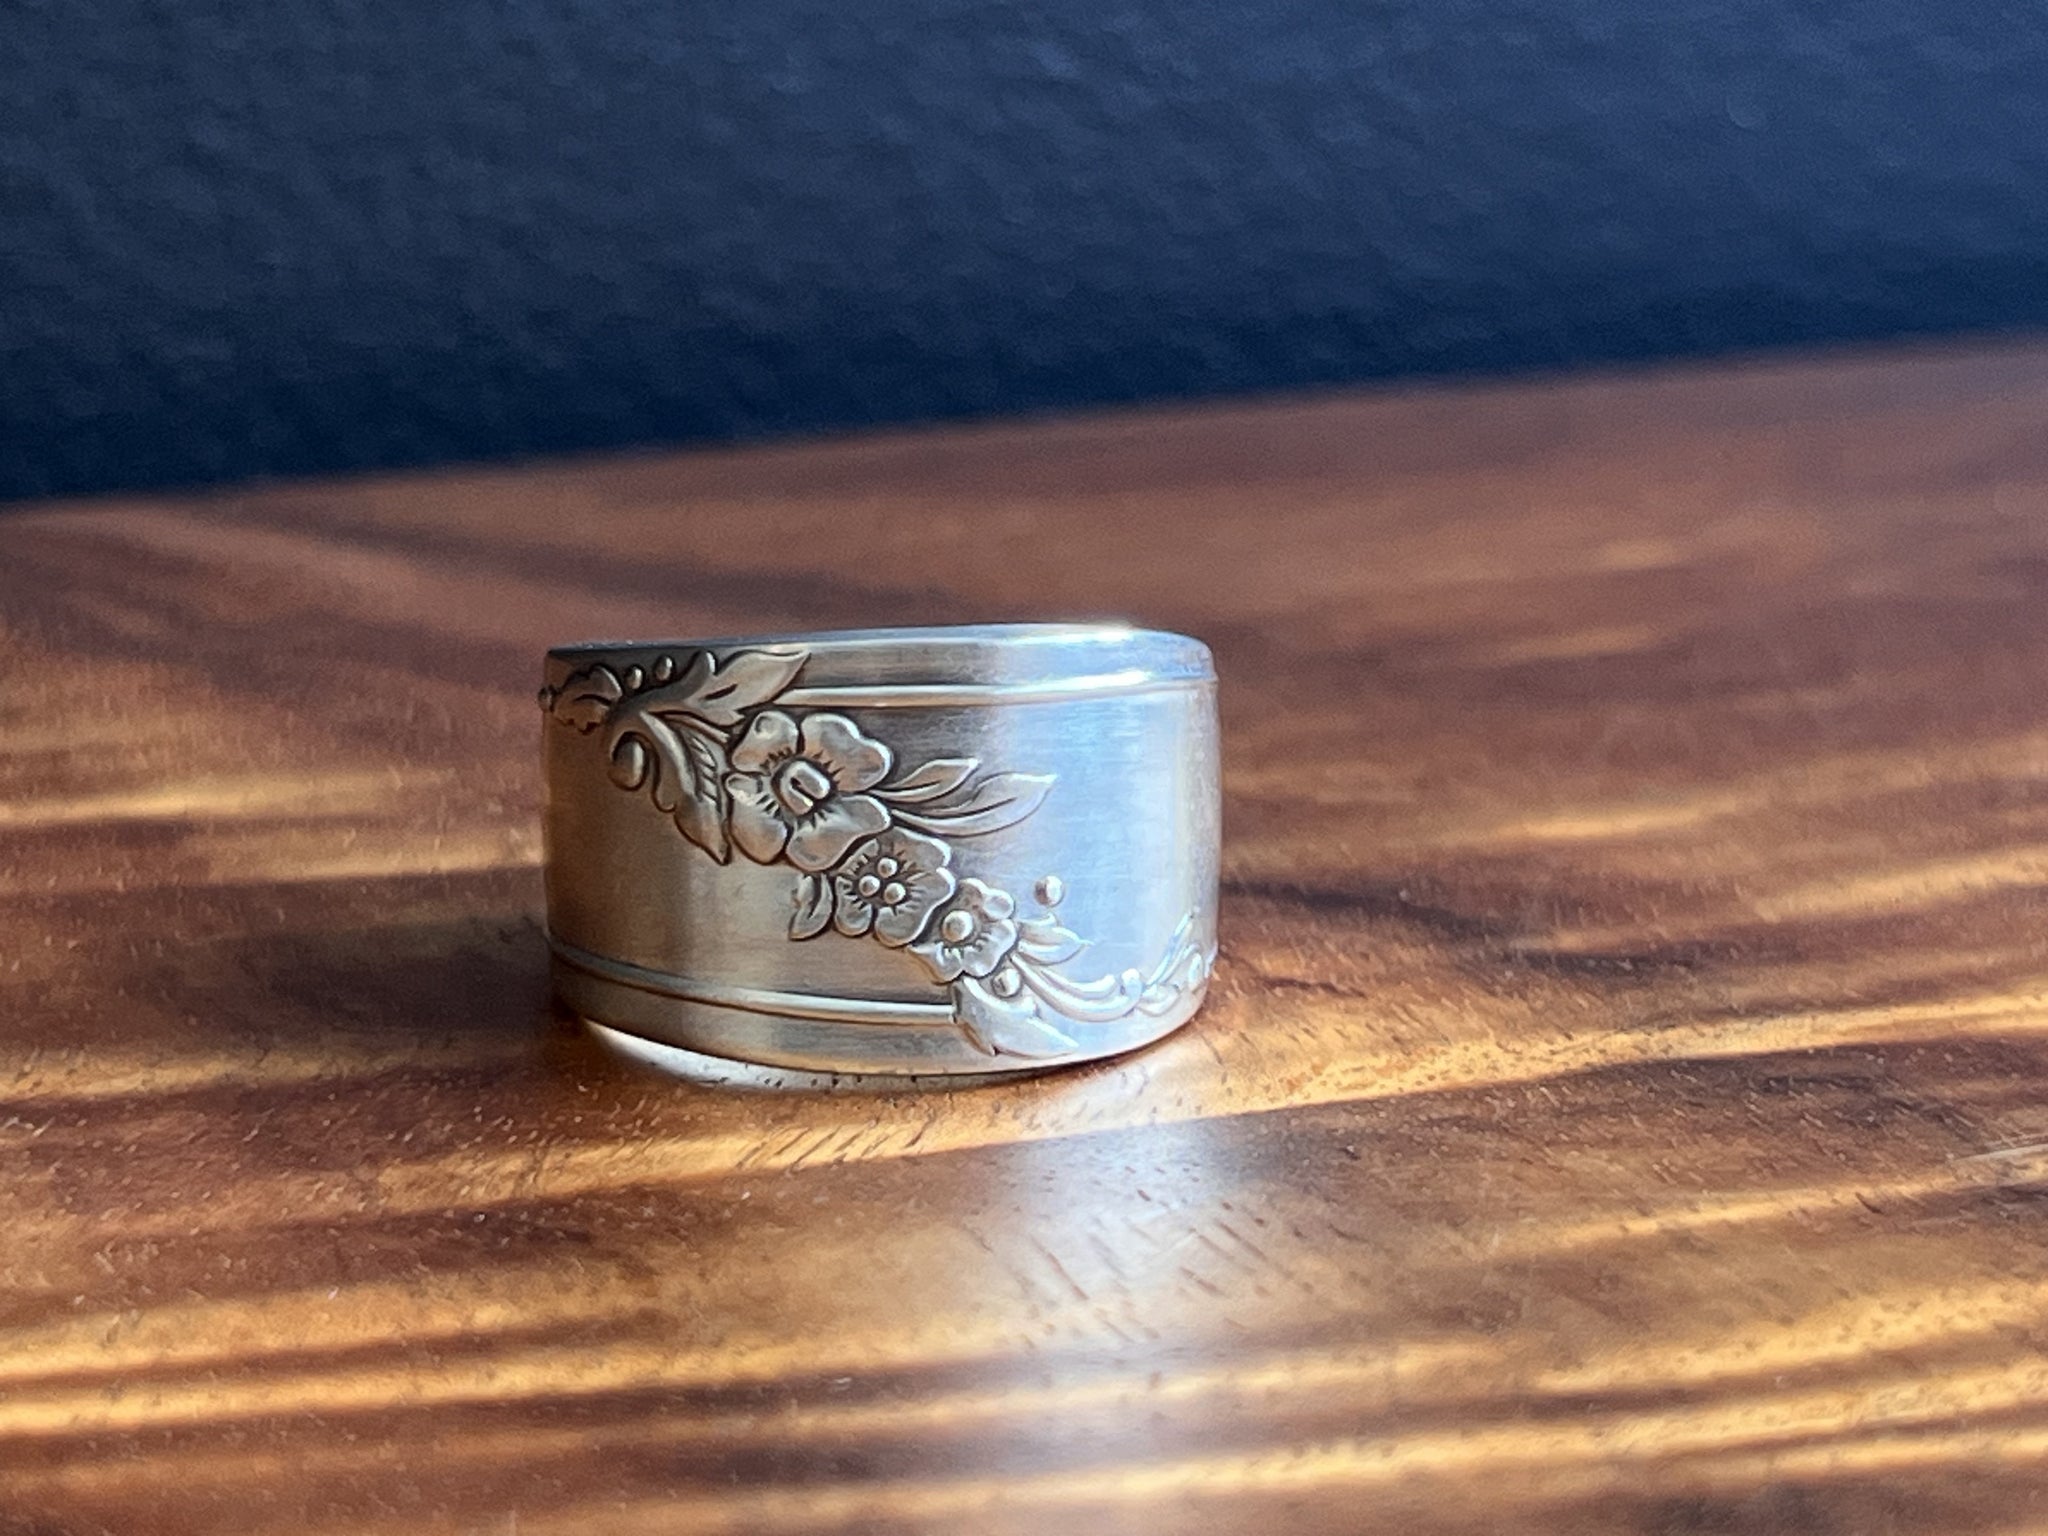 Spoon ring handcrafted from an antique spoon handle